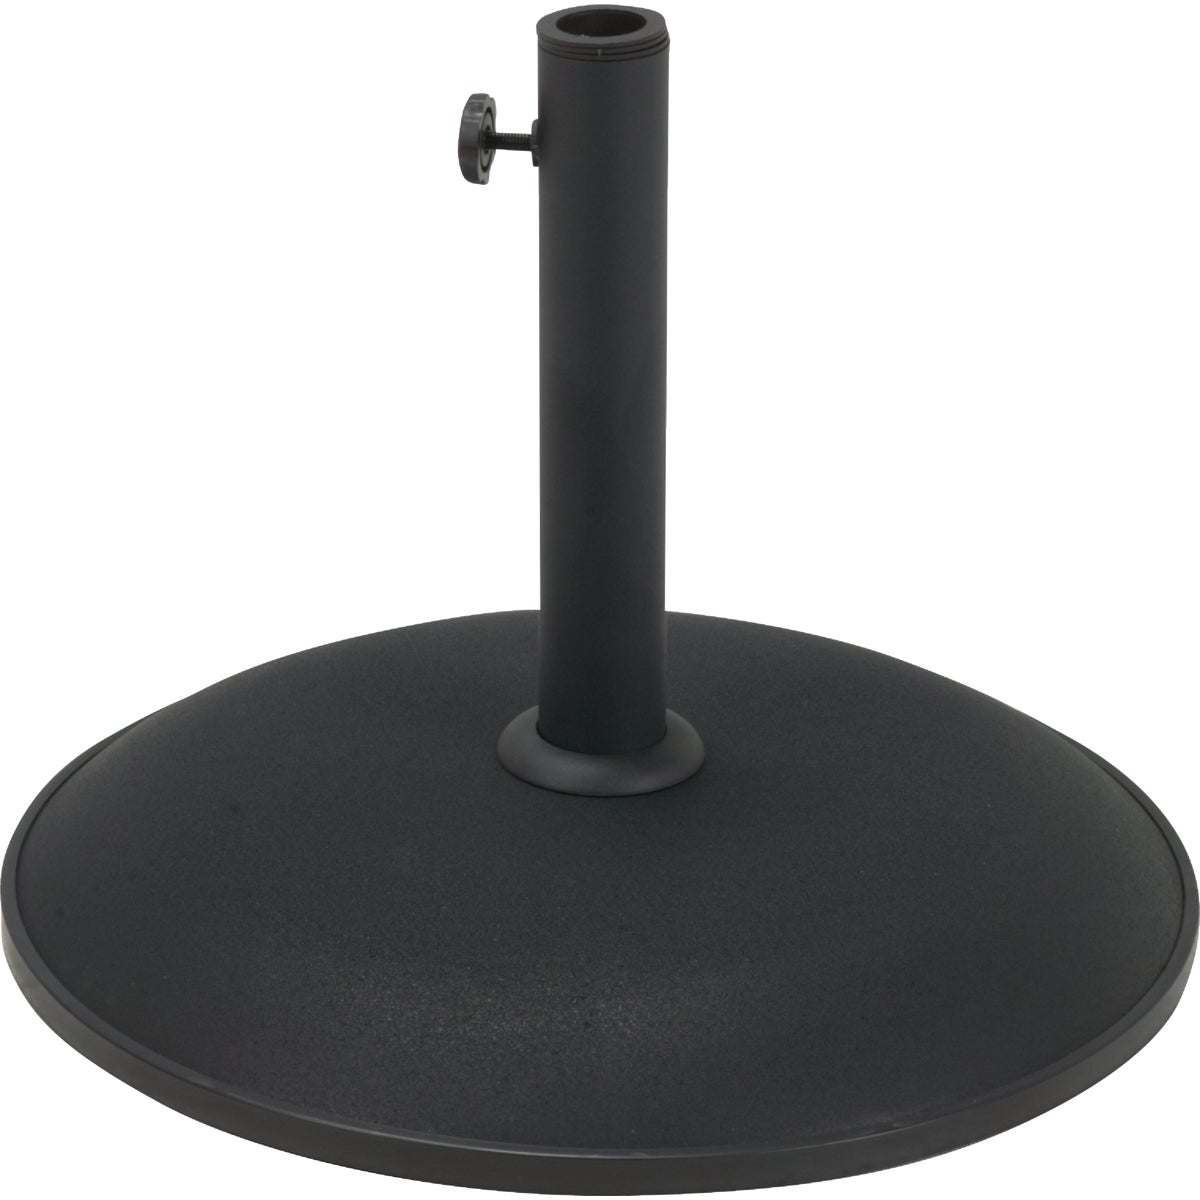 Outdoor Expressions SL-USC-01B Outdoor Expressions 17 In. Round Black Concrete Umbrella Base SL-USC-01B